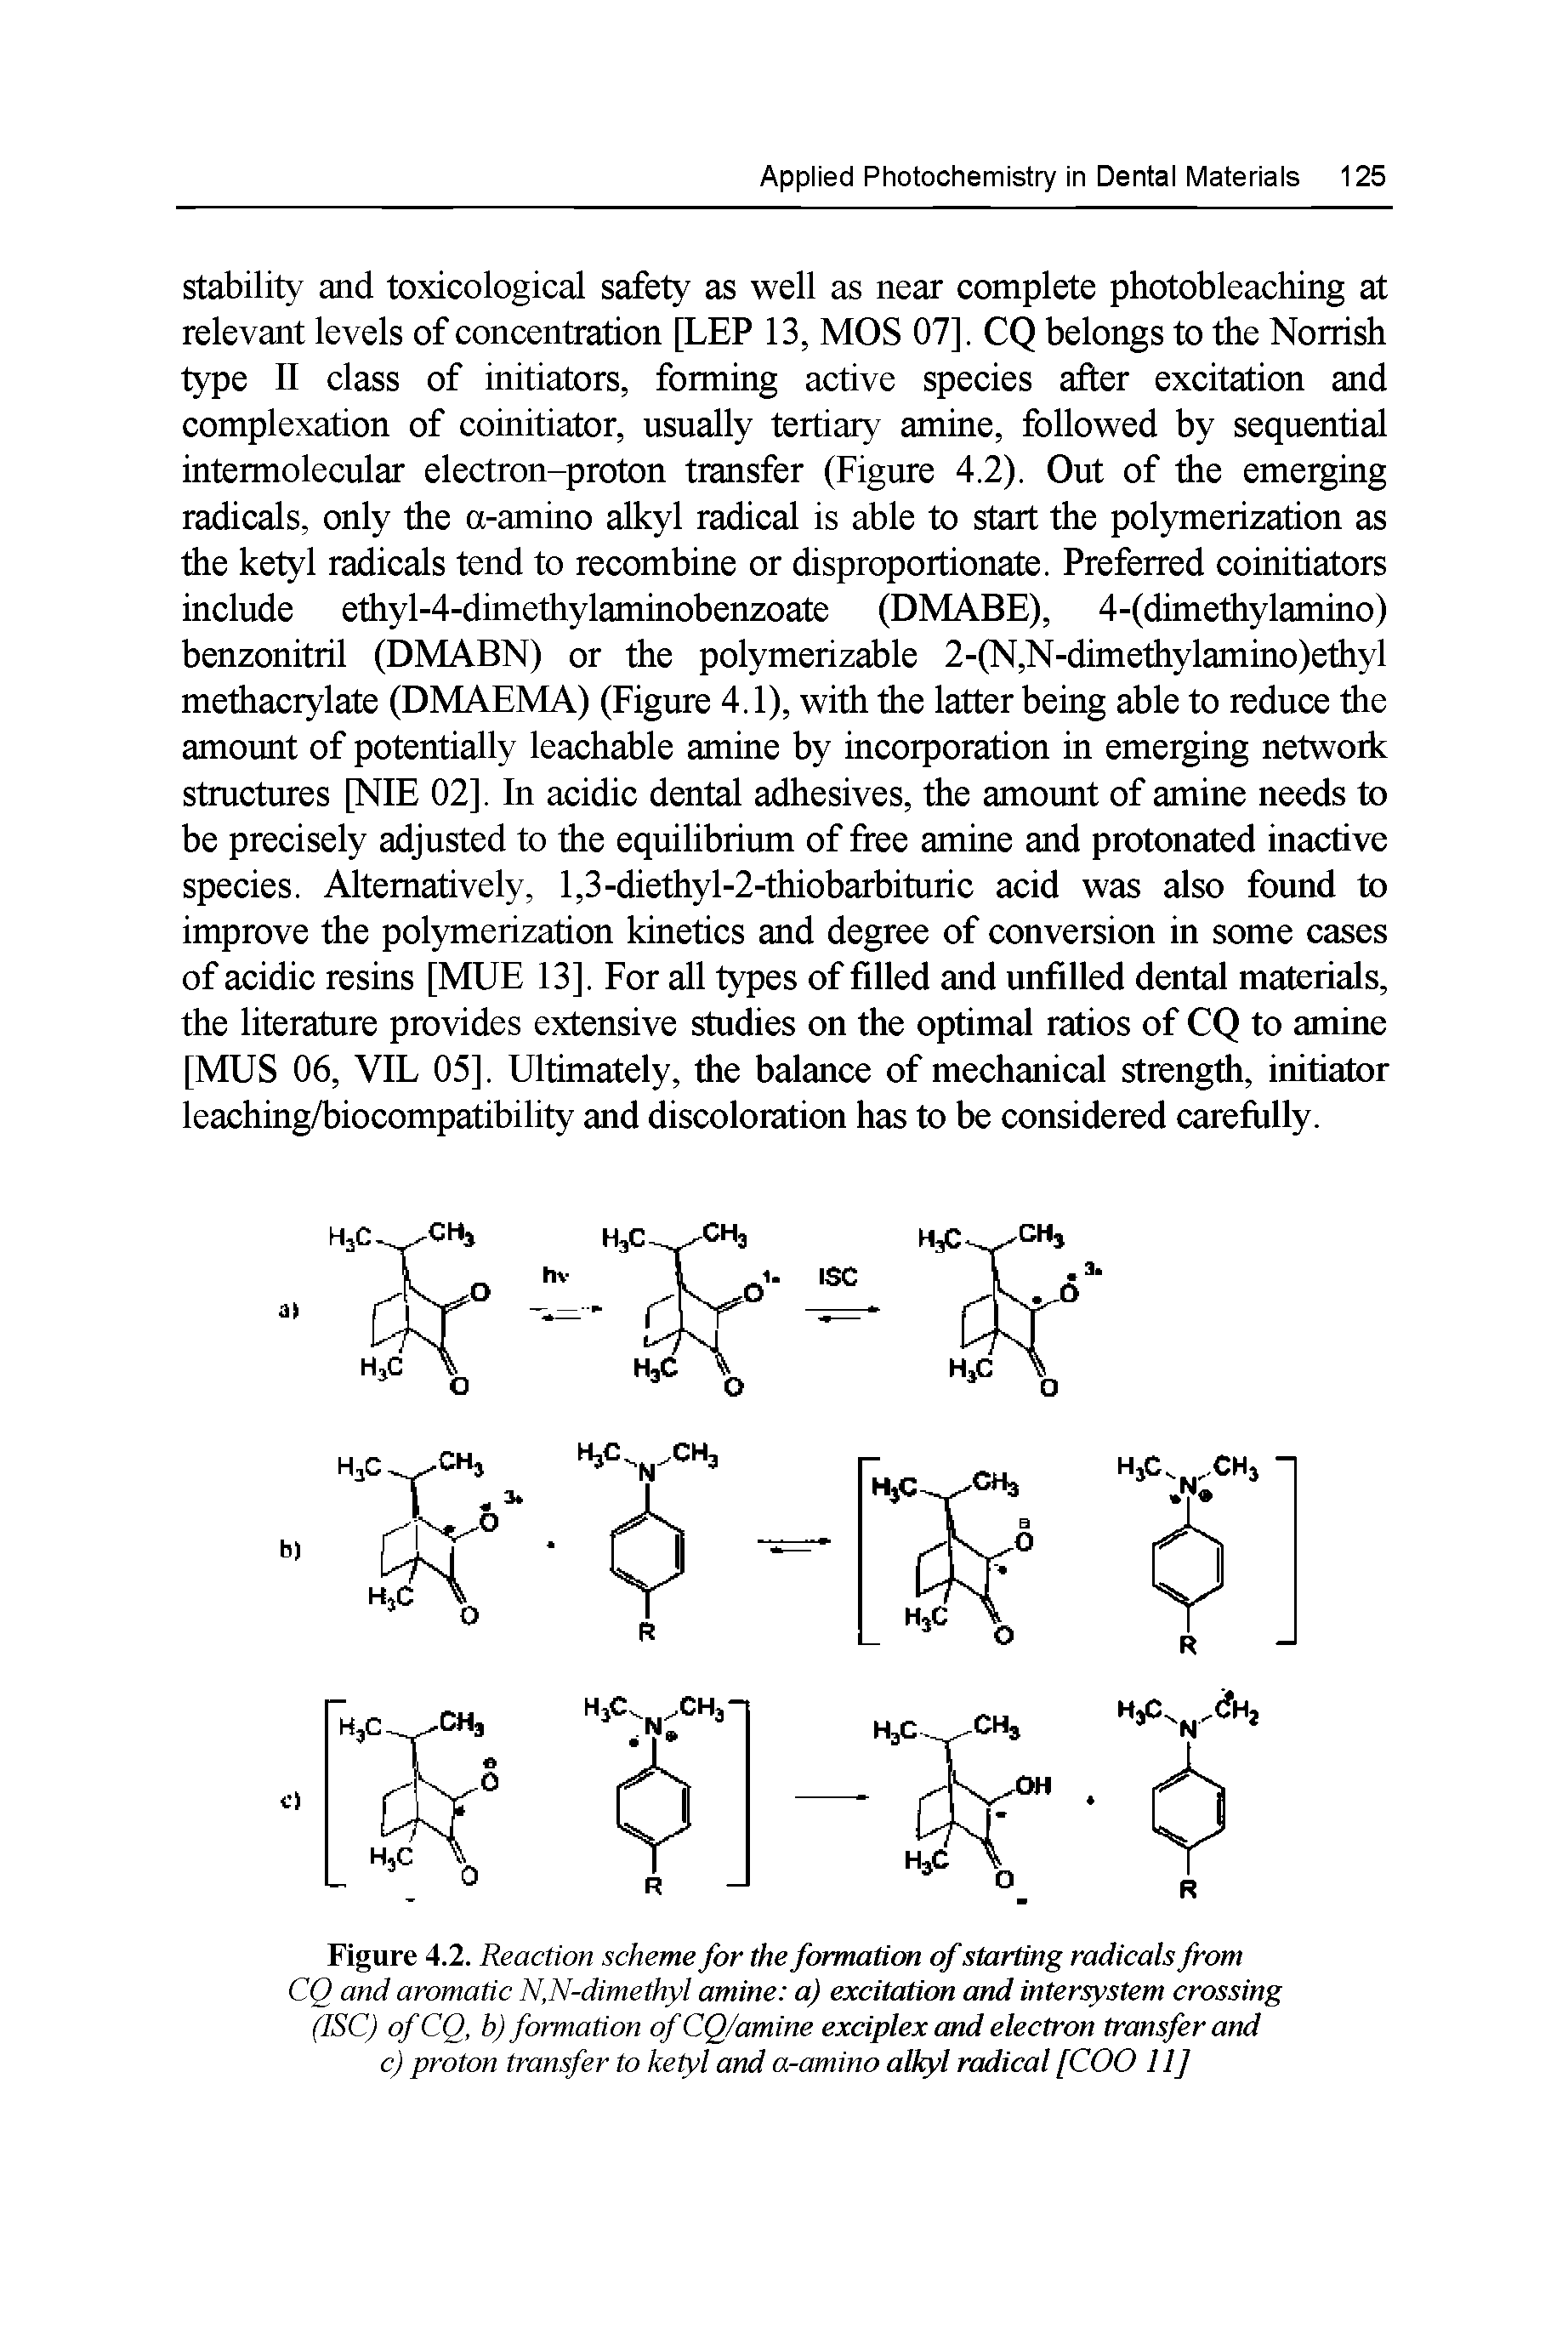 Figure 4.2. Reaction scheme for the formation of starting radicals from CQ and aromatic N,N-dimethyl amine a) excitation and intersystem crossing (ISC) ofCQ, b) formation ofCQ/amine exciplexand electron transfer and c) proton transfer to ketyl and a-amino alkyl radical [COO 11]...